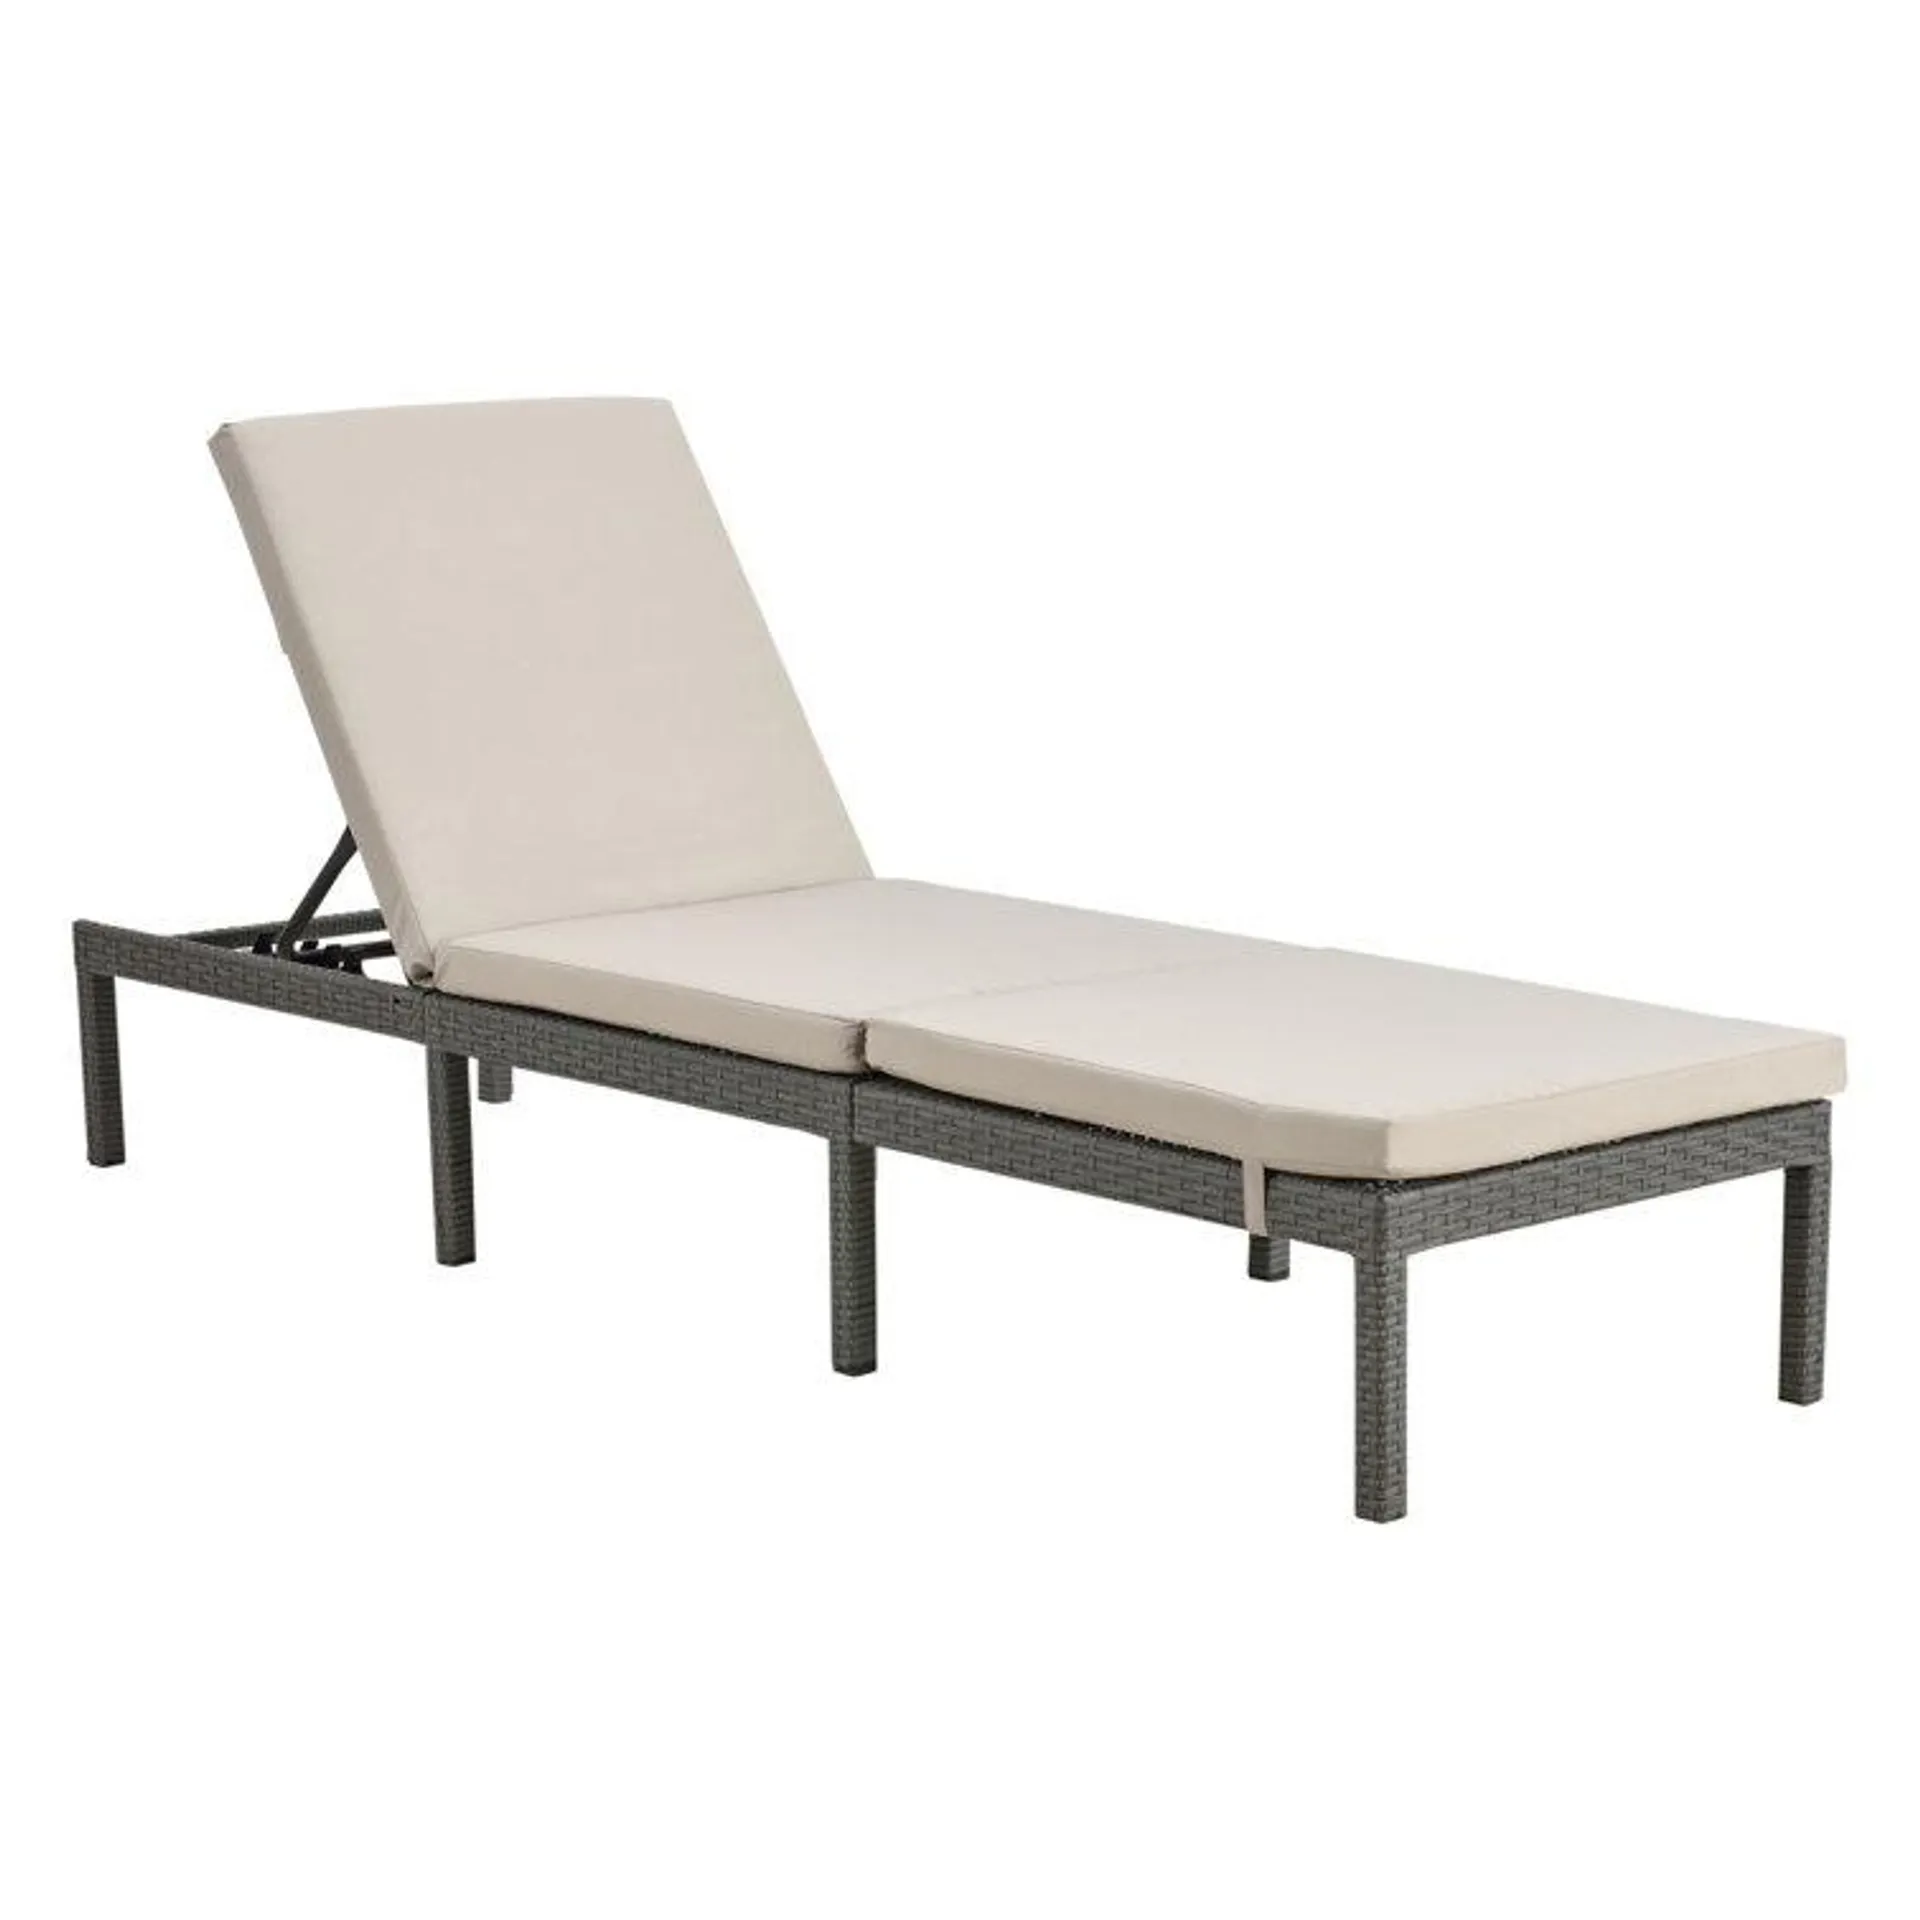 Jaking 198cm Long Reclining Single Lounger with Cushions